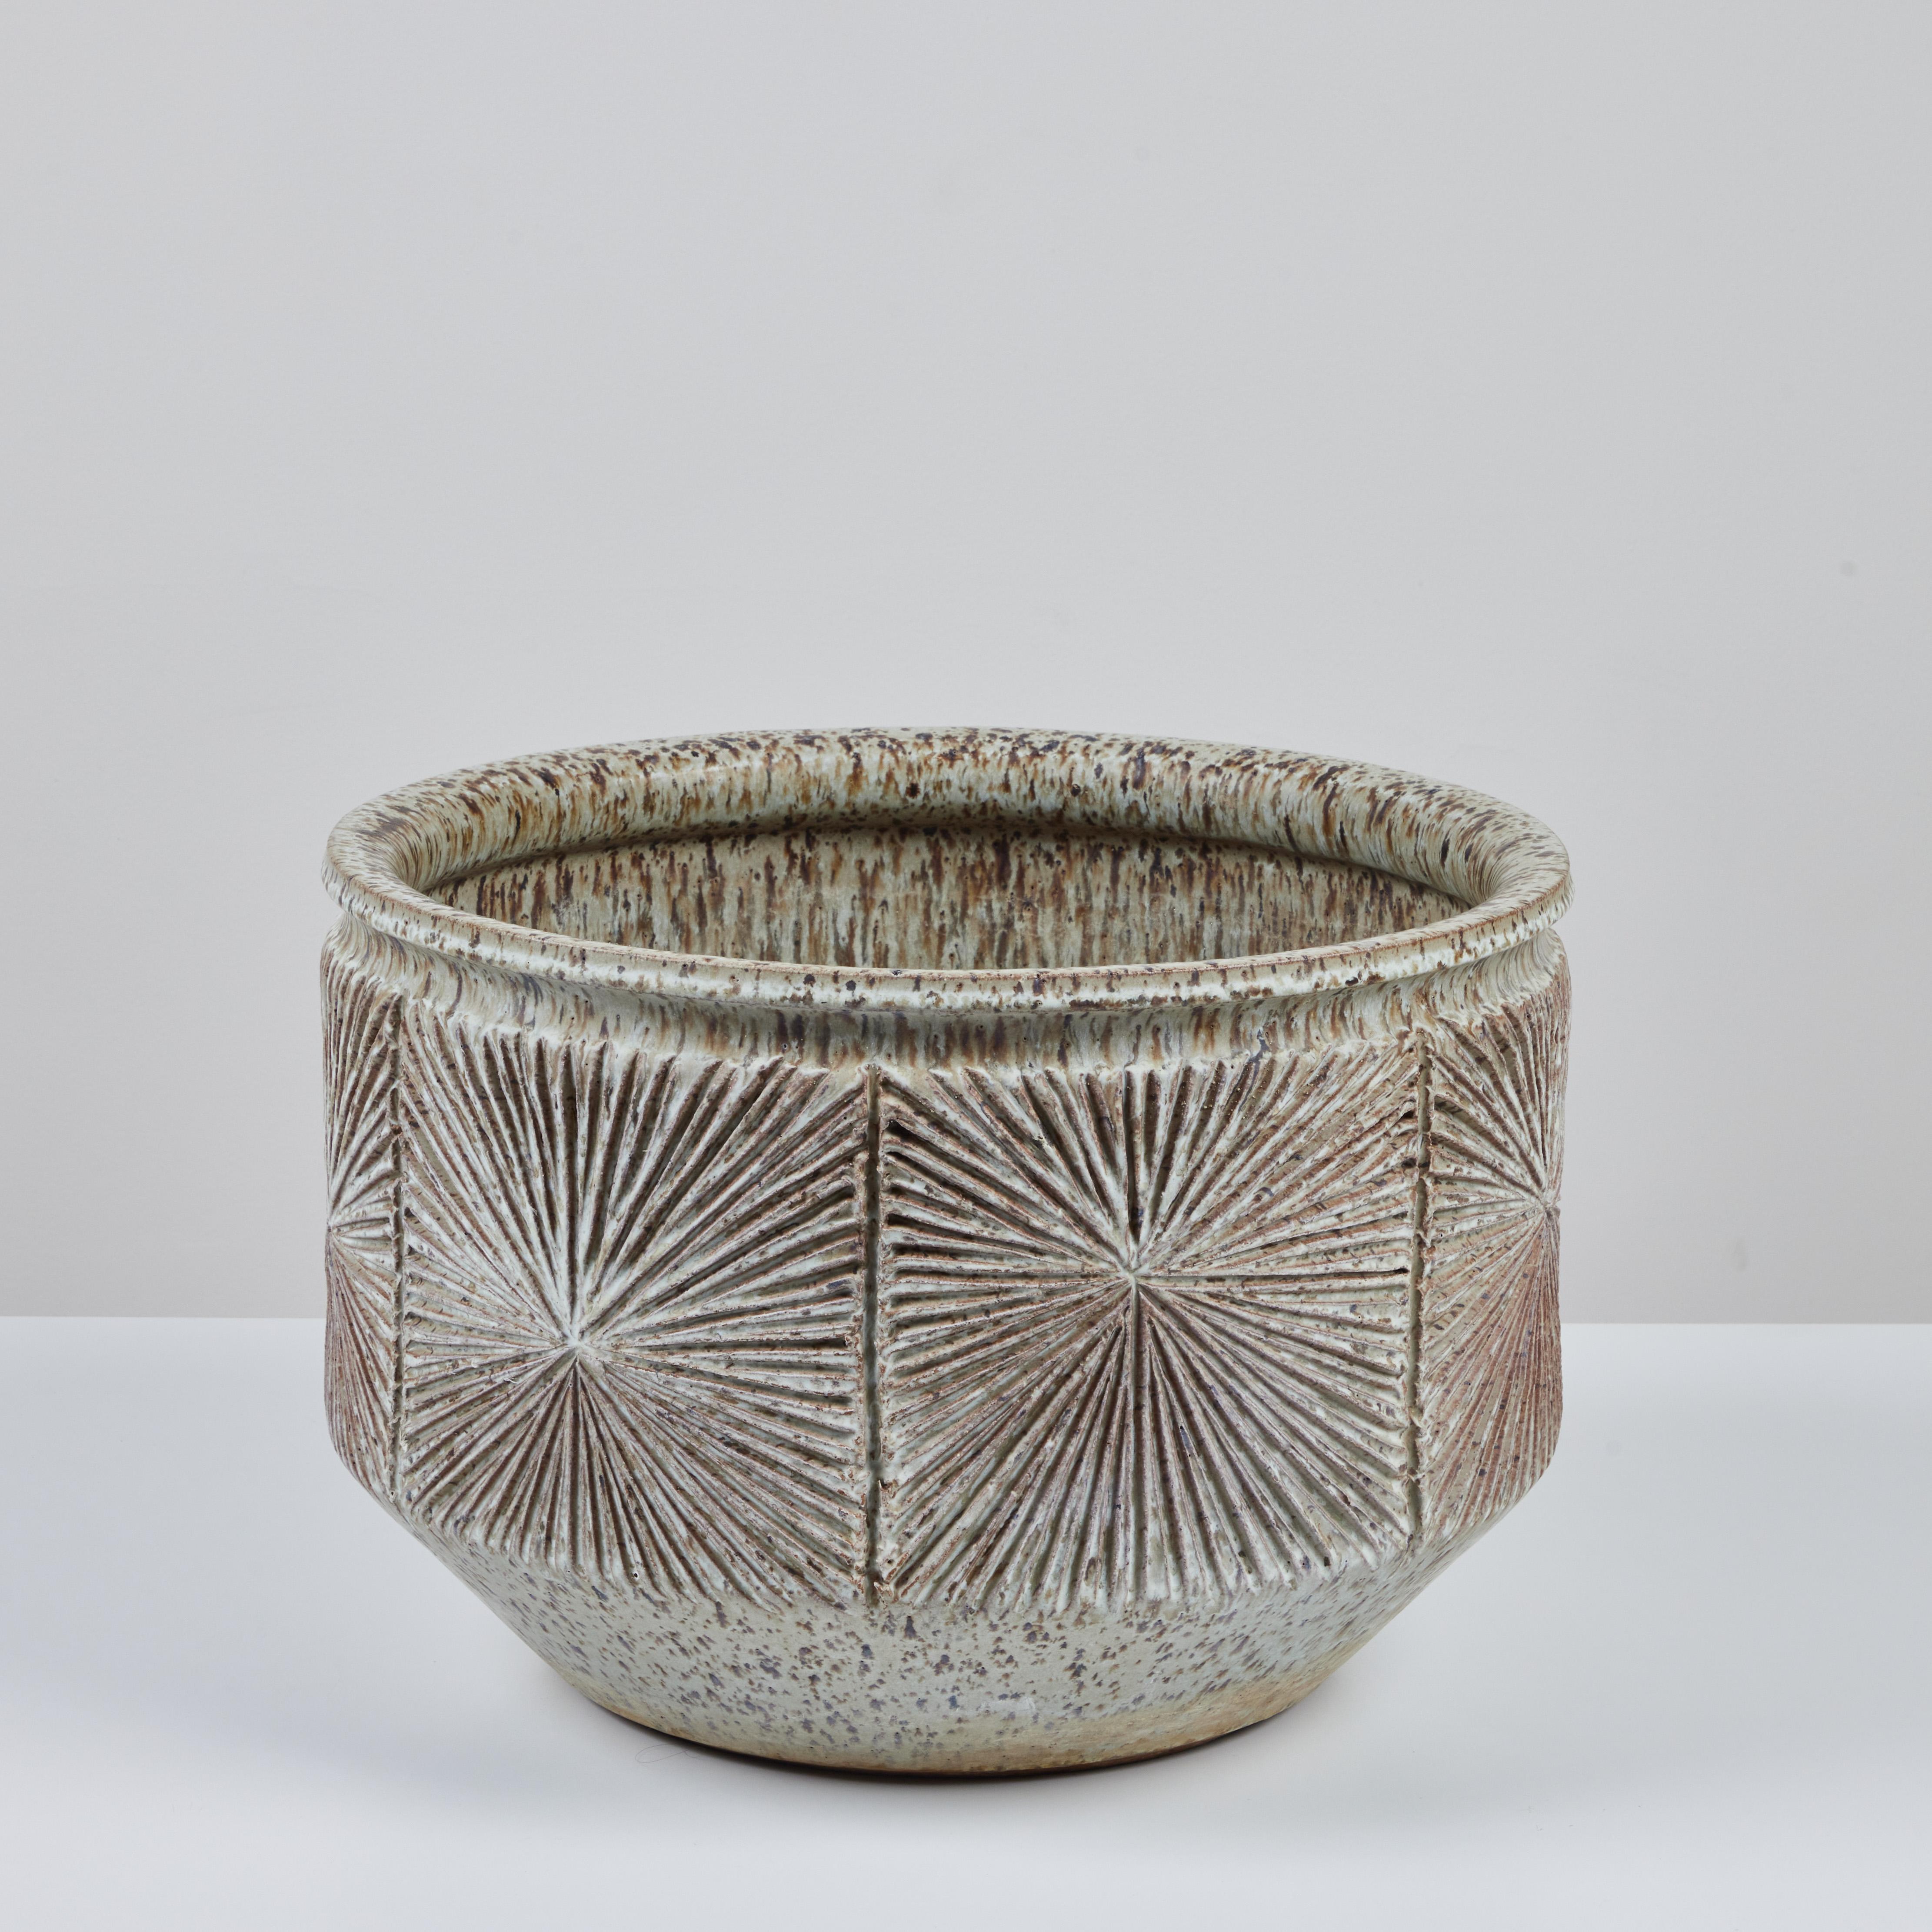 David Cressey & Robert Maxwell Speckle “Sunburst” Bowl Planter for Earthgender In Excellent Condition For Sale In Los Angeles, CA